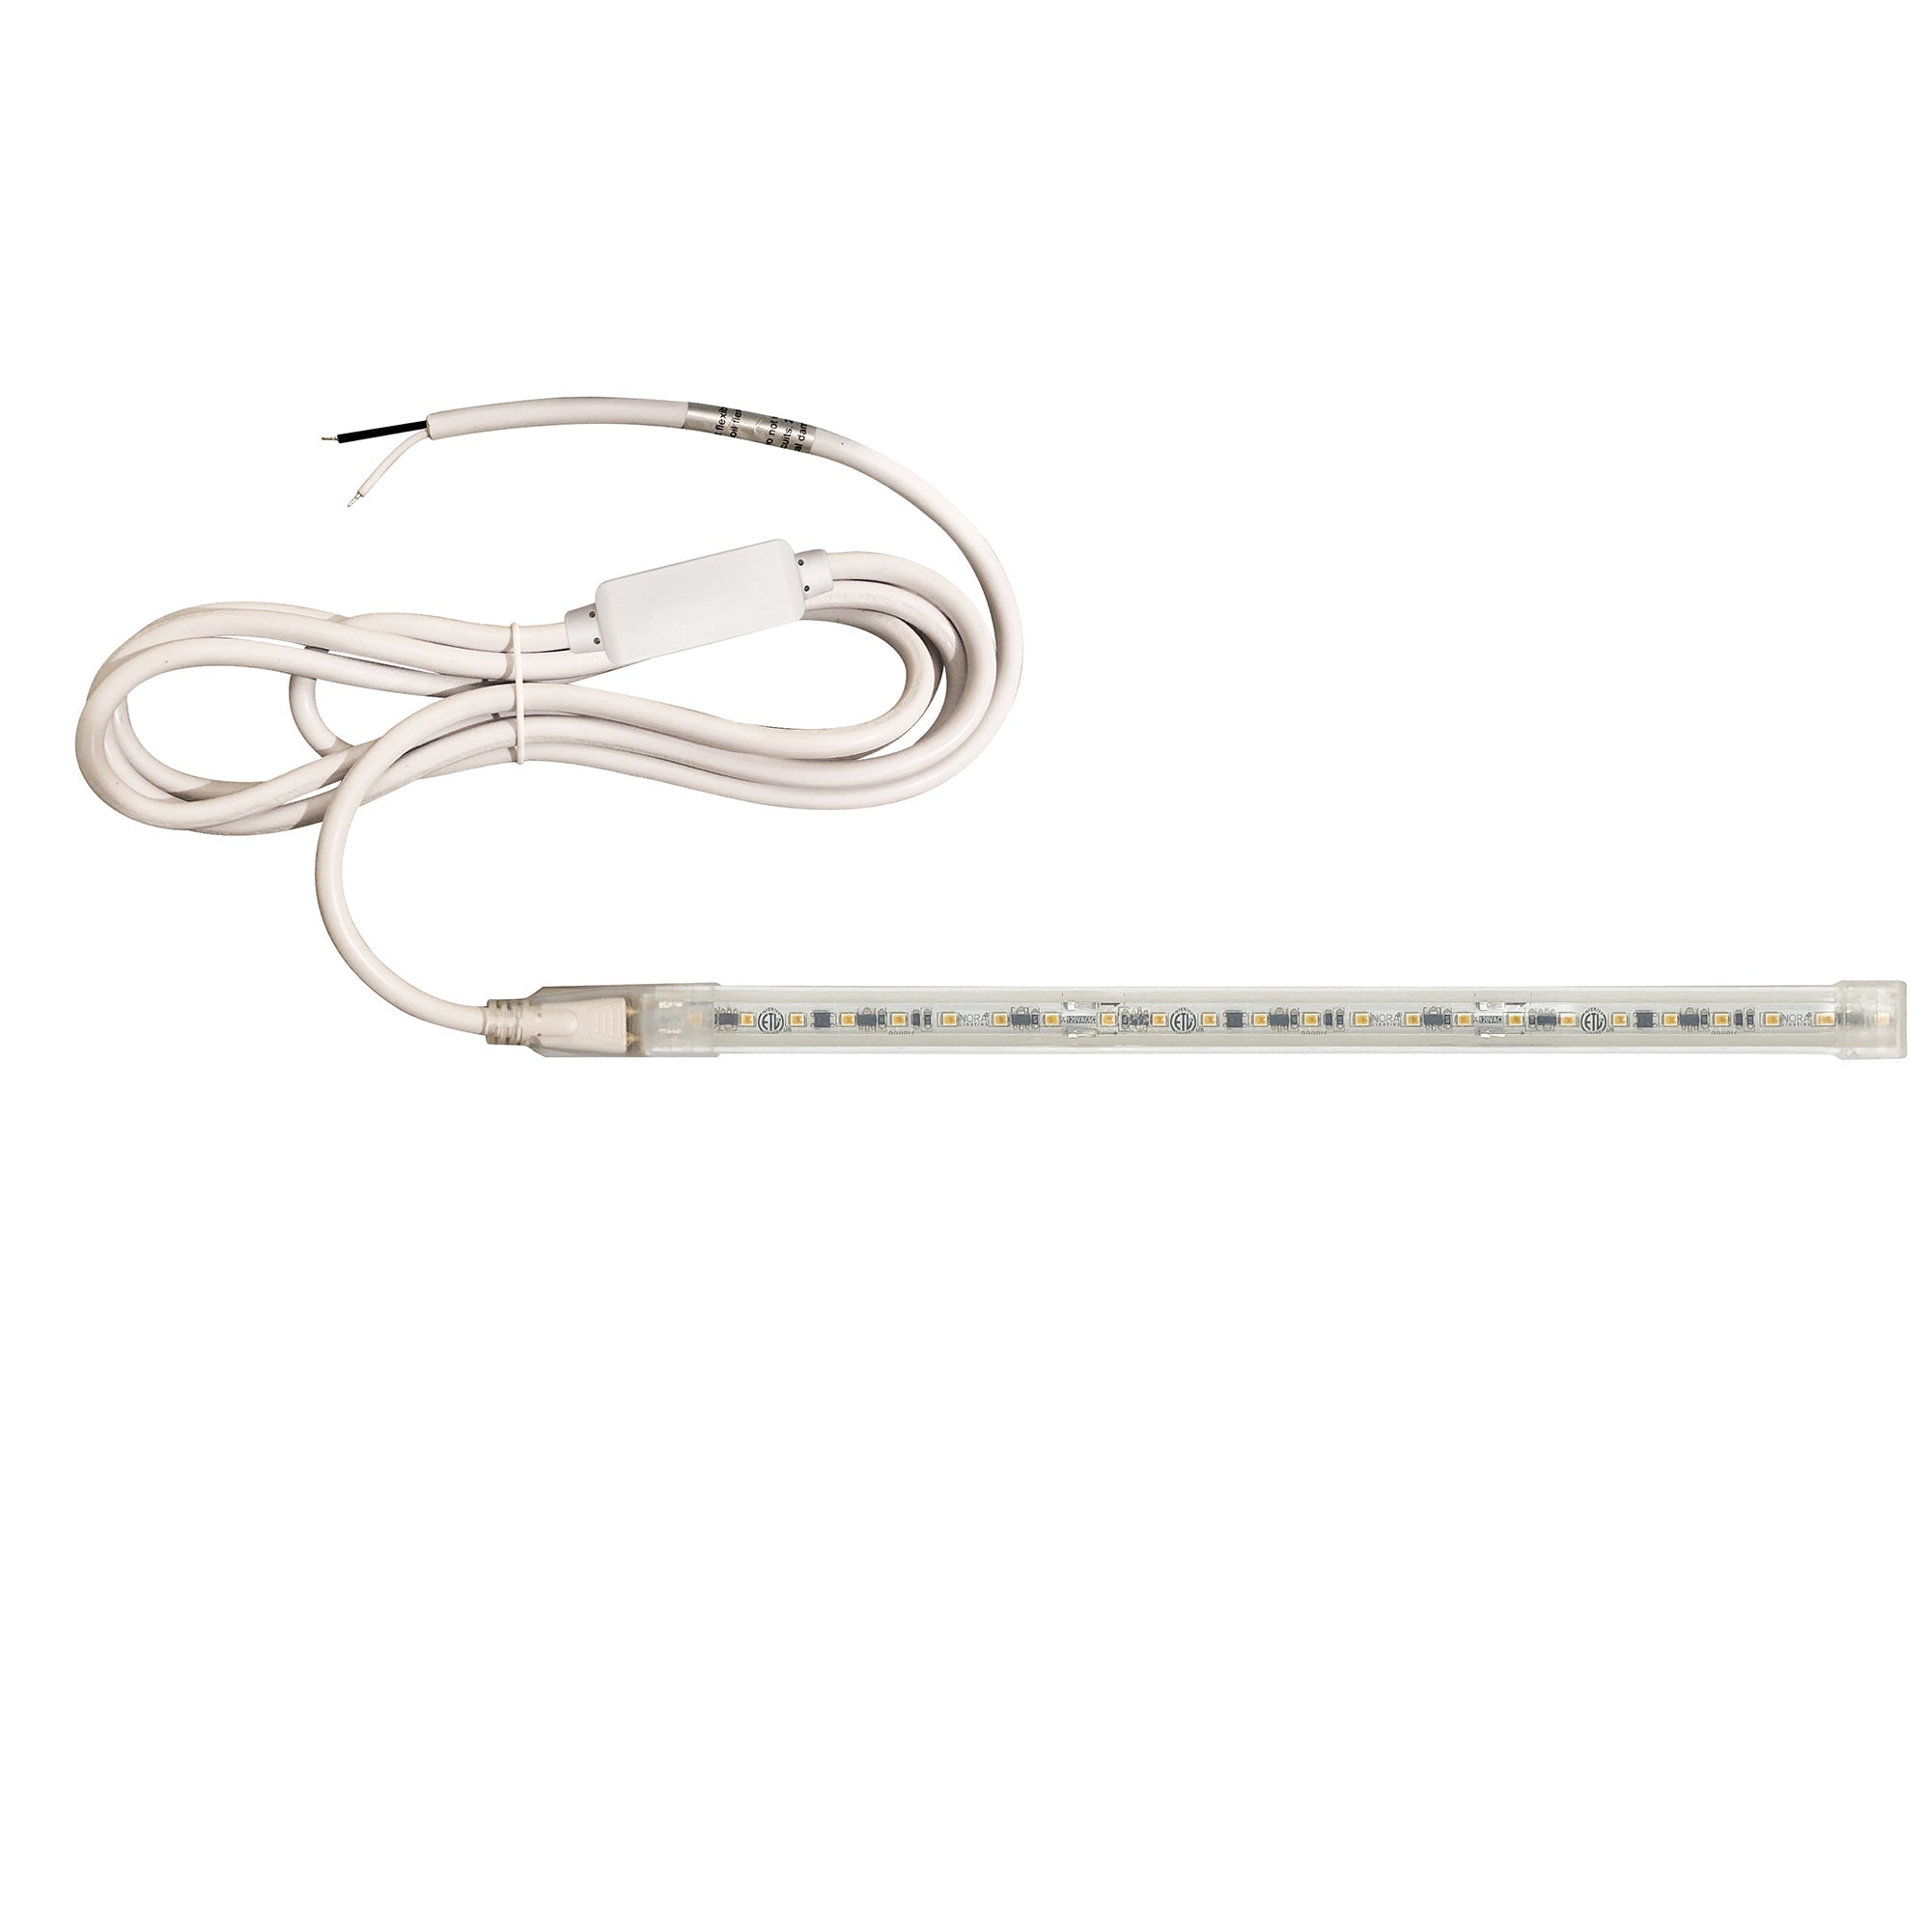 Nora Lighting NUTP13-W64-12-930-HWSP - Accent / Undercabinet - Custom Cut 64-ft 120V Continuous LED Tape Light, 330lm / 3.6W per foot, 3000K, w/ Mounting Clips and 8' Hardwired Power Cord w/ Surge Protector